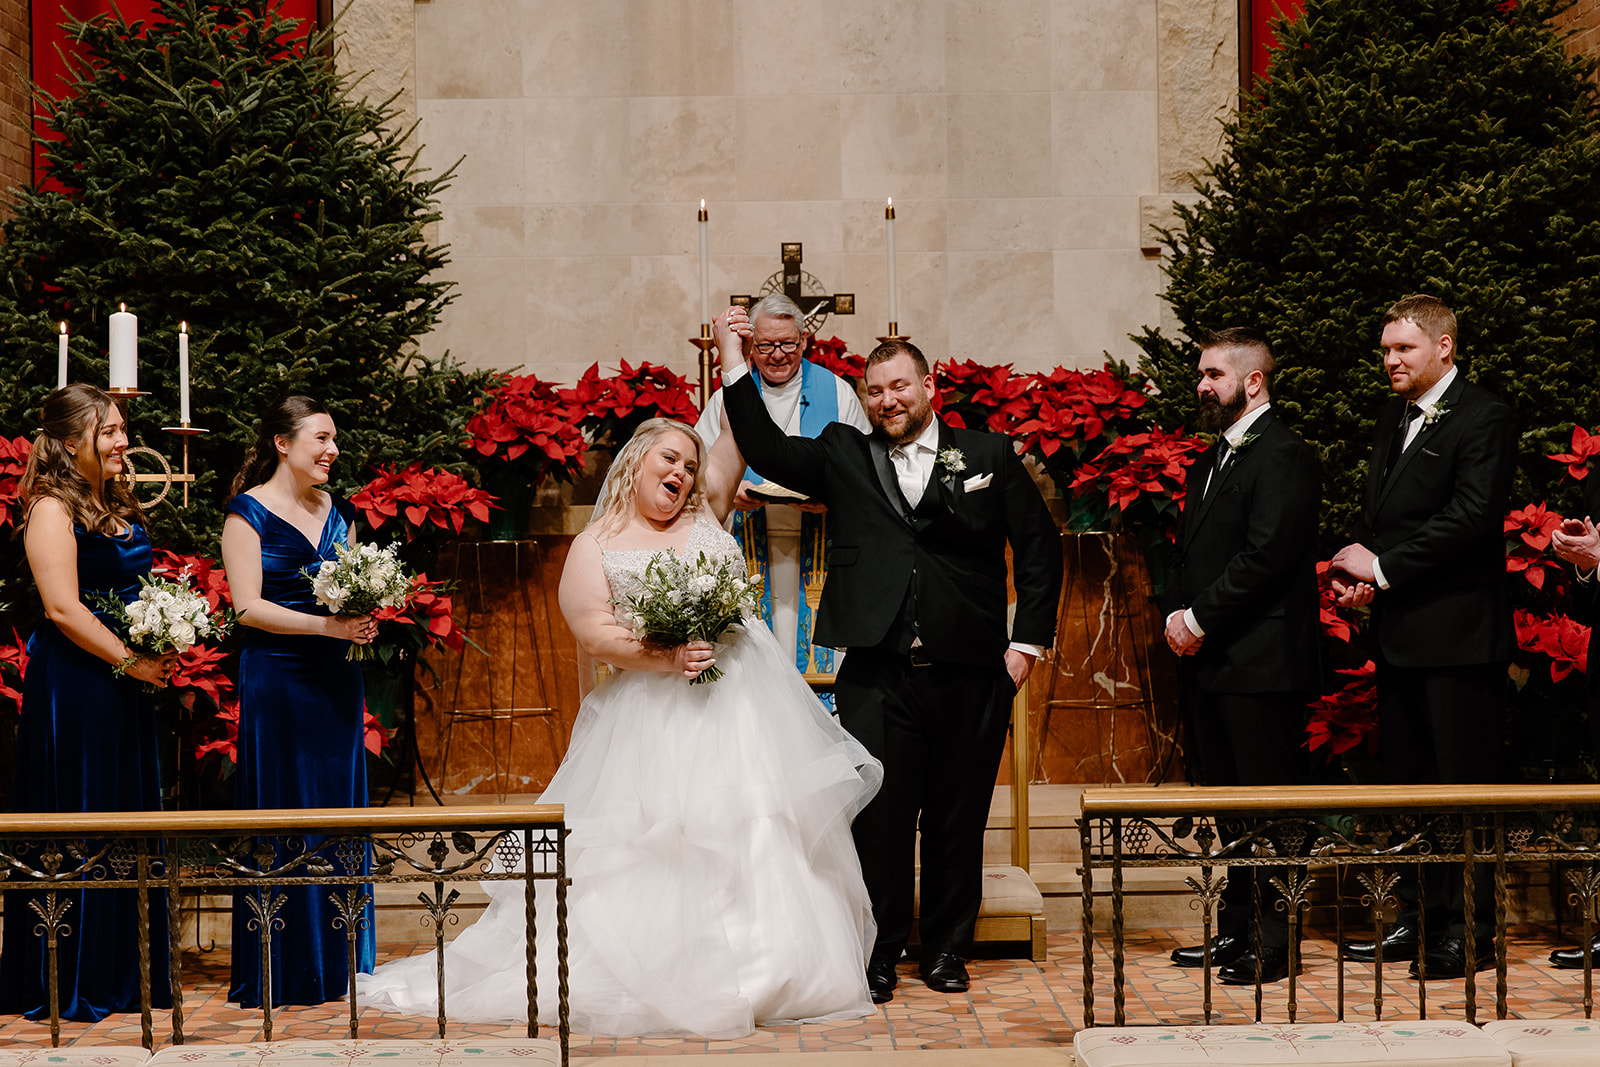 Bride and groom cheer in church during wedding ceremony